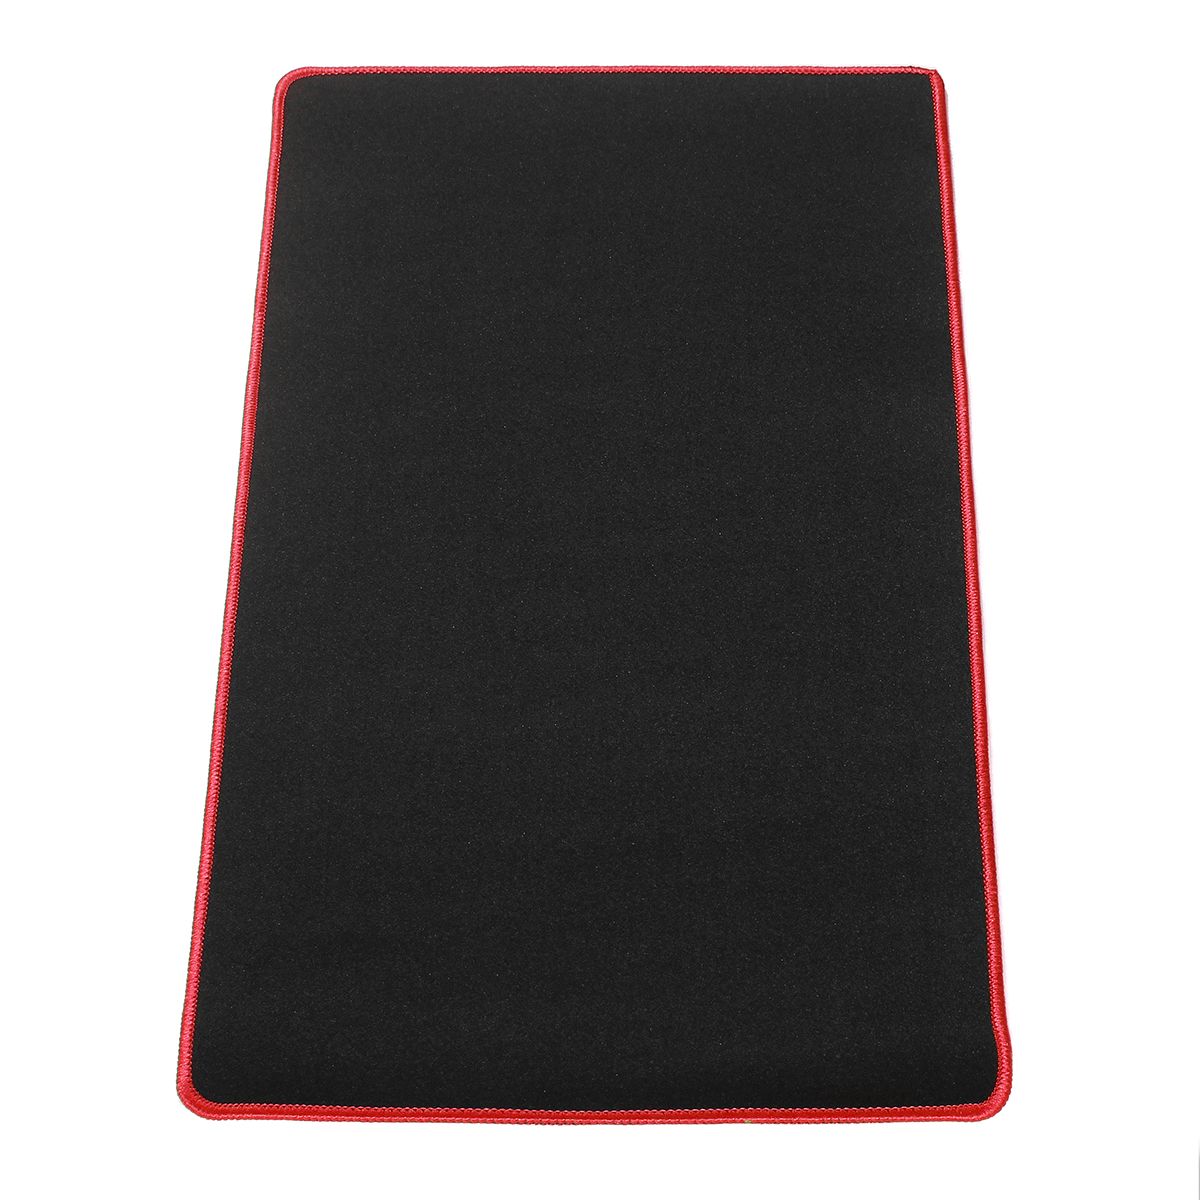 Large-Mouse-Pad-Non-slip-Rubber-Gaming-Keyboard-Pad-Desktop-Table-Protective-Mat-for-Home-Office-1727494